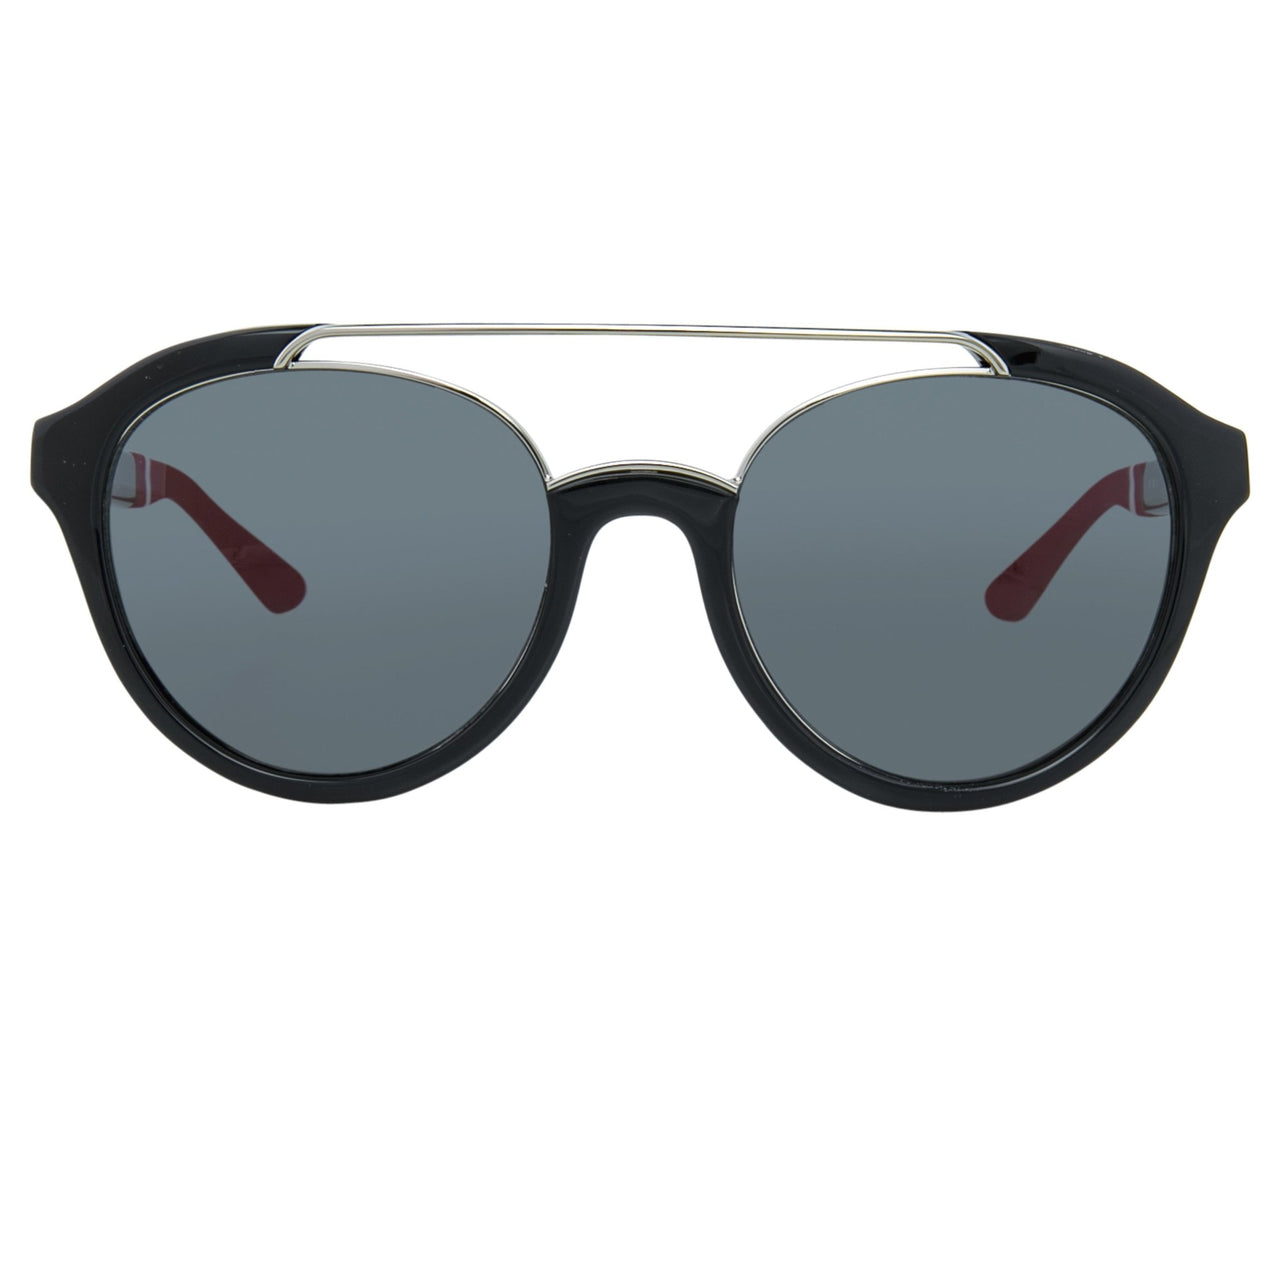 Orlebar Brown Sunglasses Oval Black with Grey Lenses Category 3 OB42C7SUN - Watches & Crystals